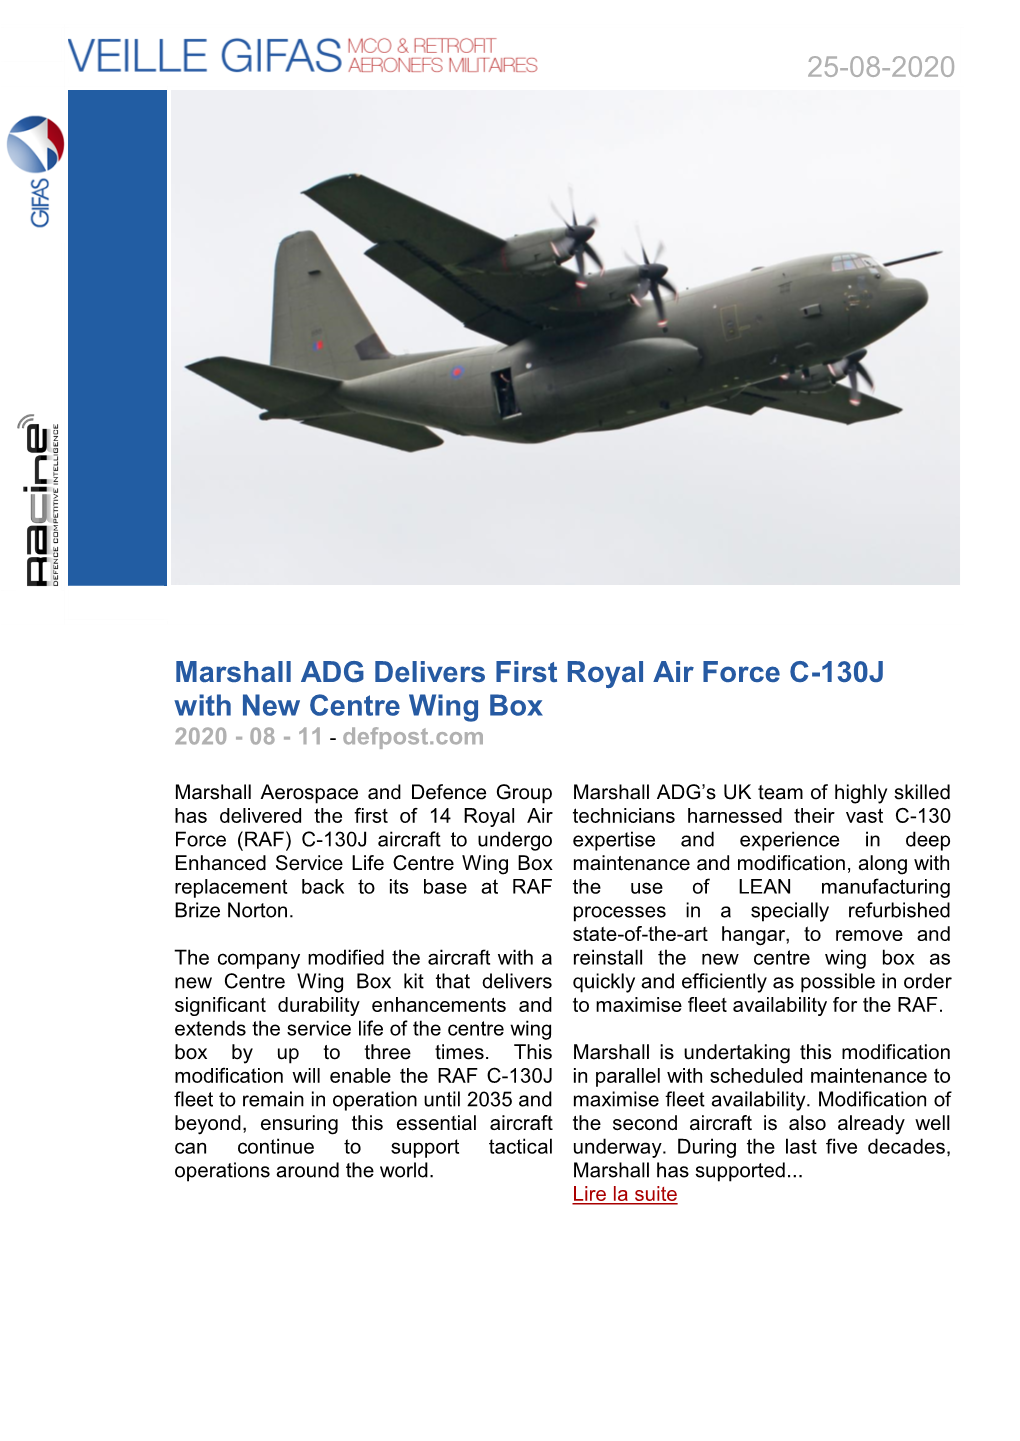 25-08-2020 Marshall ADG Delivers First Royal Air Force C-130J With